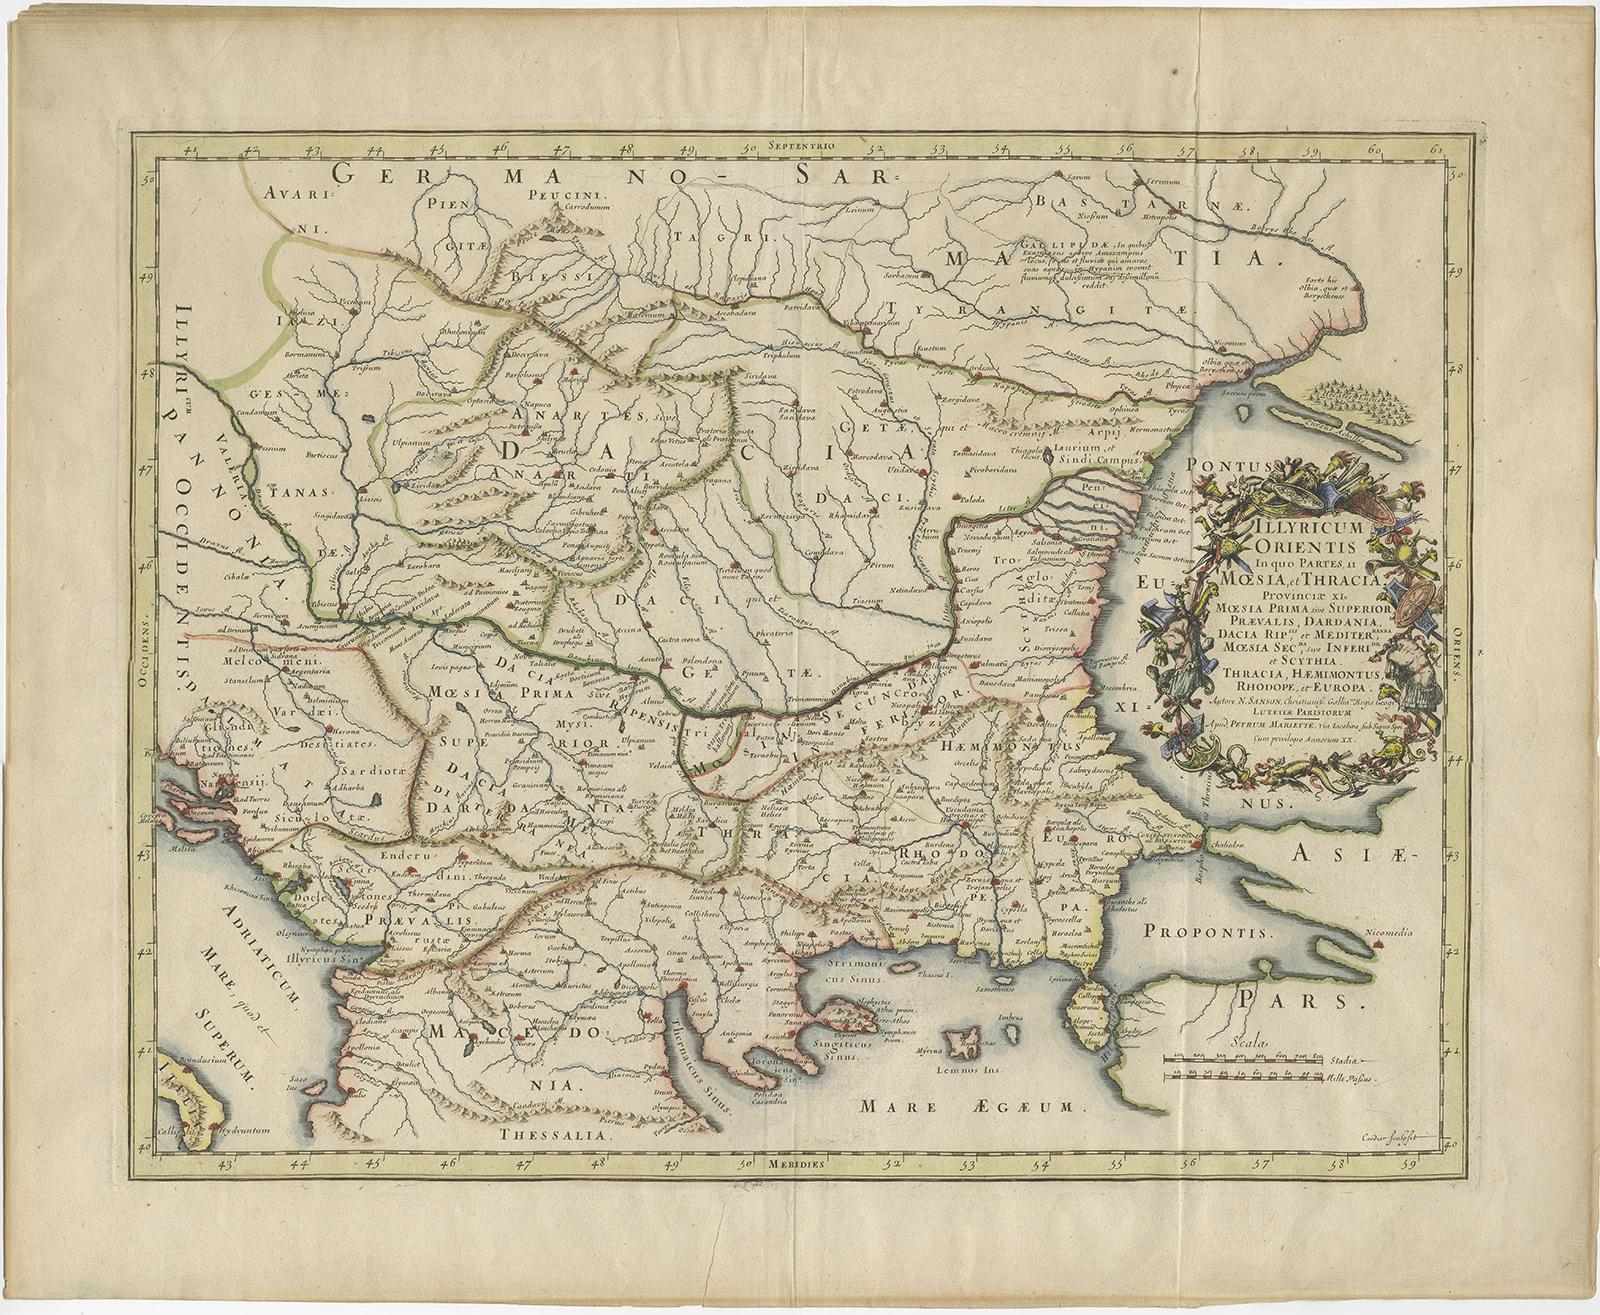 Antique map titled 'Illyricum Orientis: In quo Partes II Moesia et Thracia'. 

Engraved map of the area west of the Baltic Sea, present day Bulgaria, Romania, and Turkey. The map is based on the cartography of Nicolas Sanson and published by P.